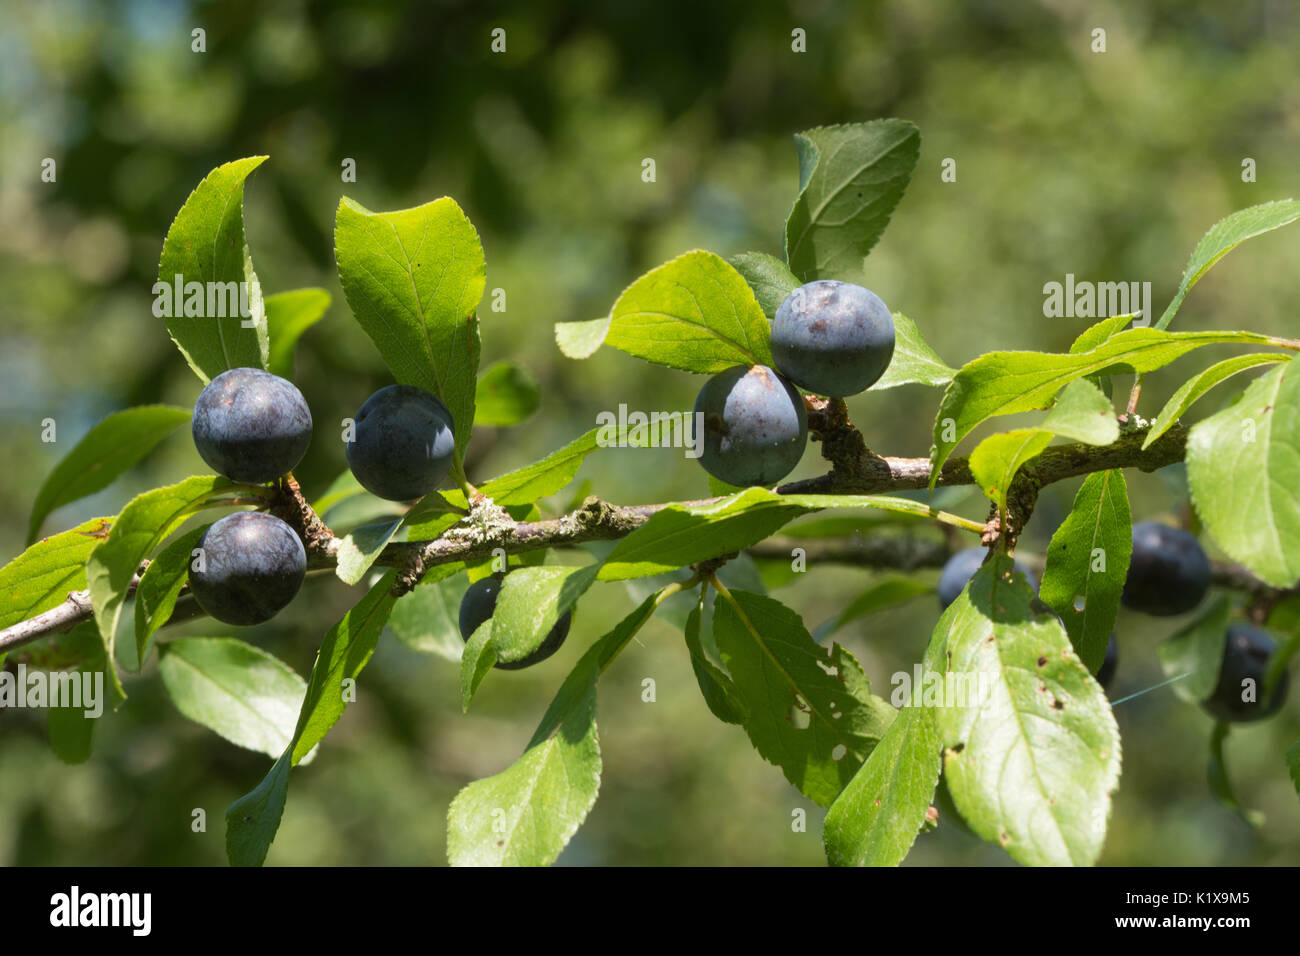 Close-up of ripe sloe (blackthorn) berries in late summer on blackthorn tree in Hampshire, UK Stock Photo